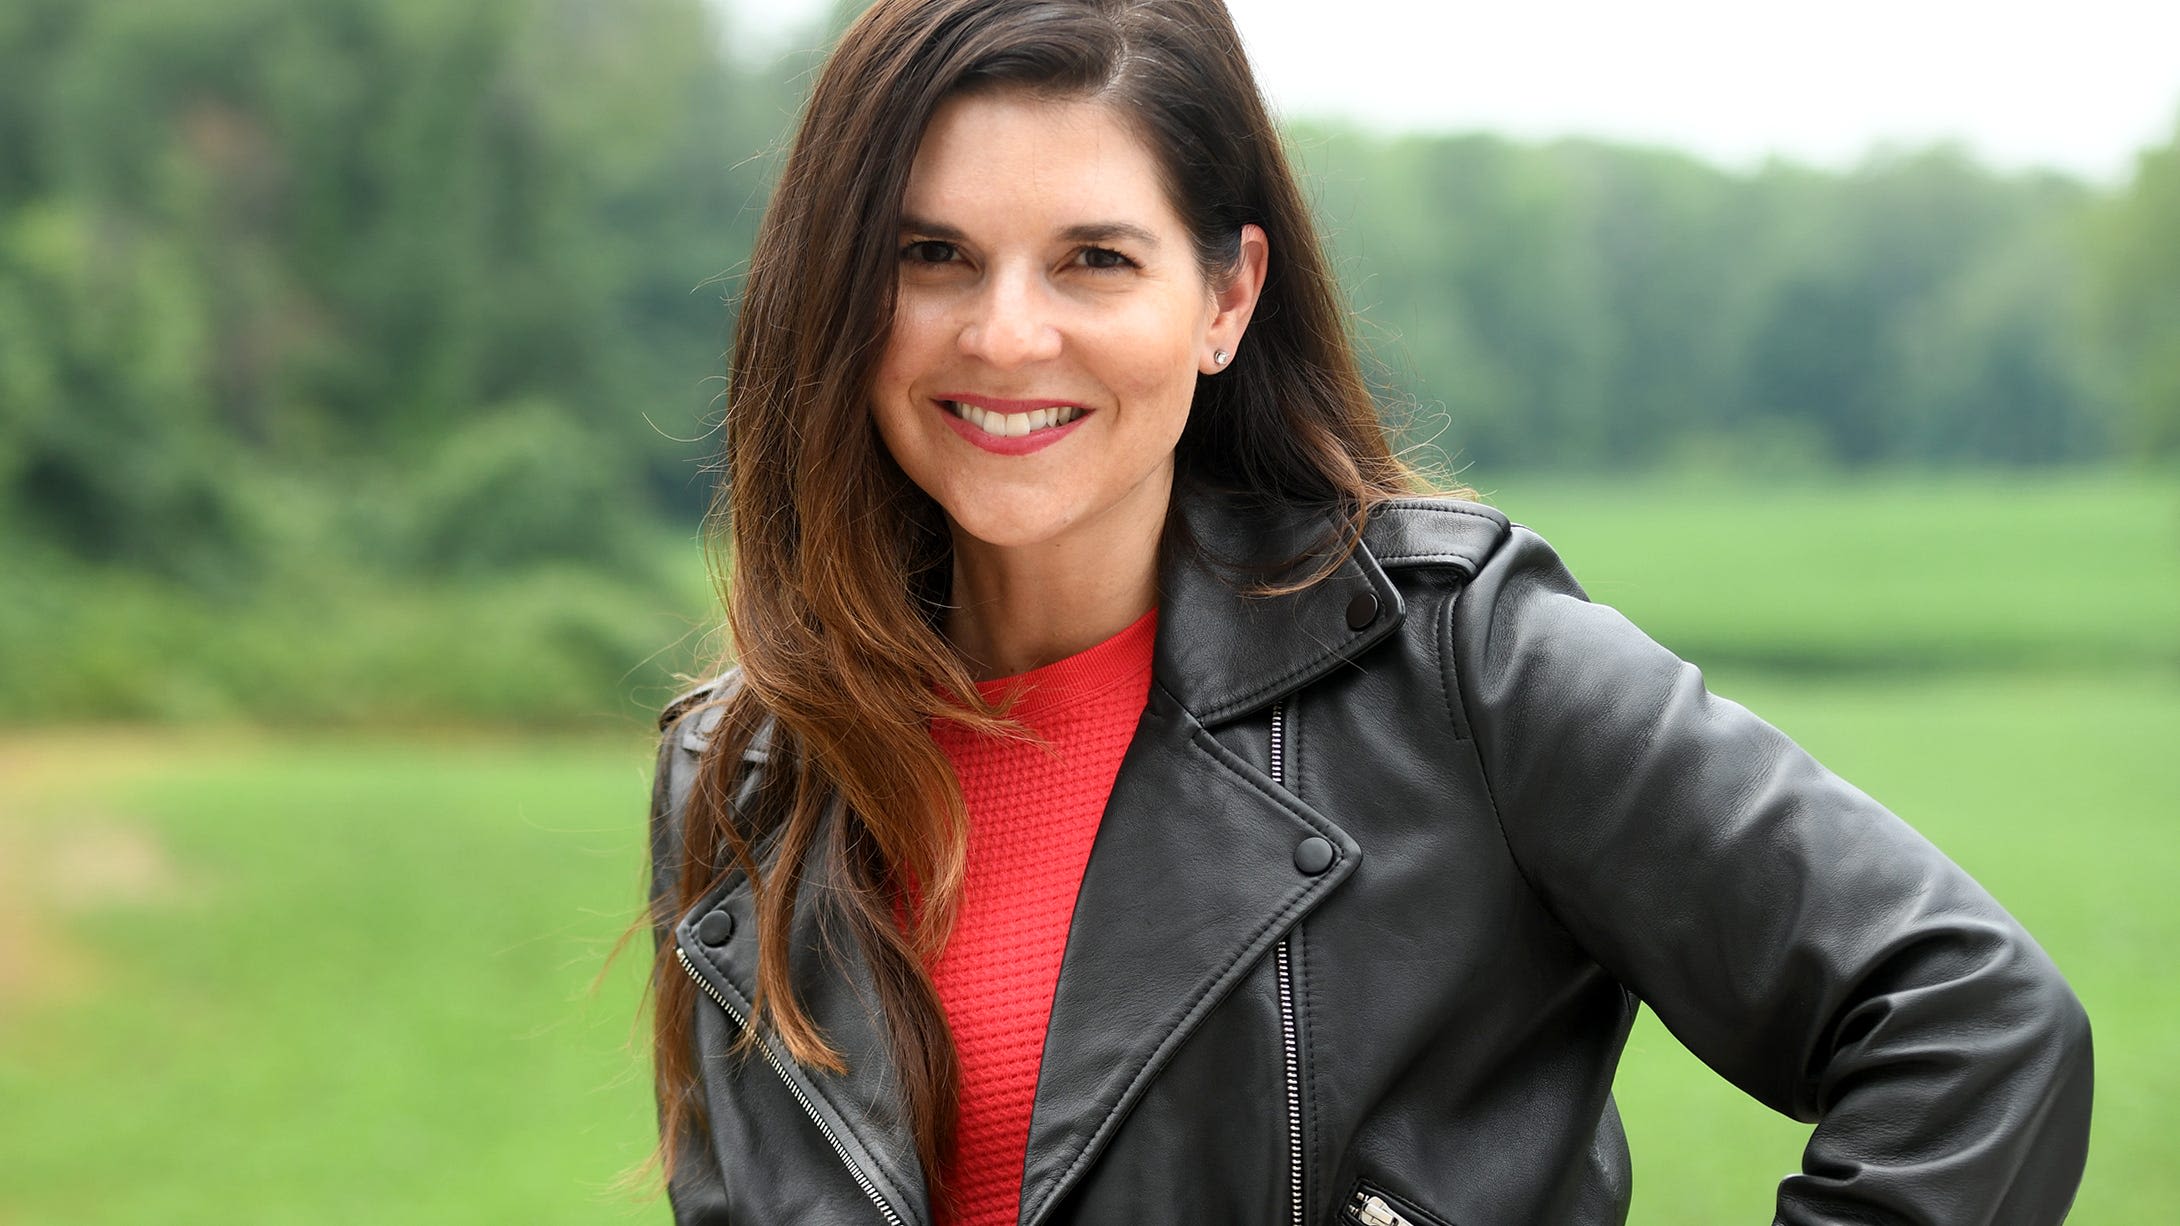 Meet Liz Mayer. She's a marketing consultant, life coach and CycleBar instructor